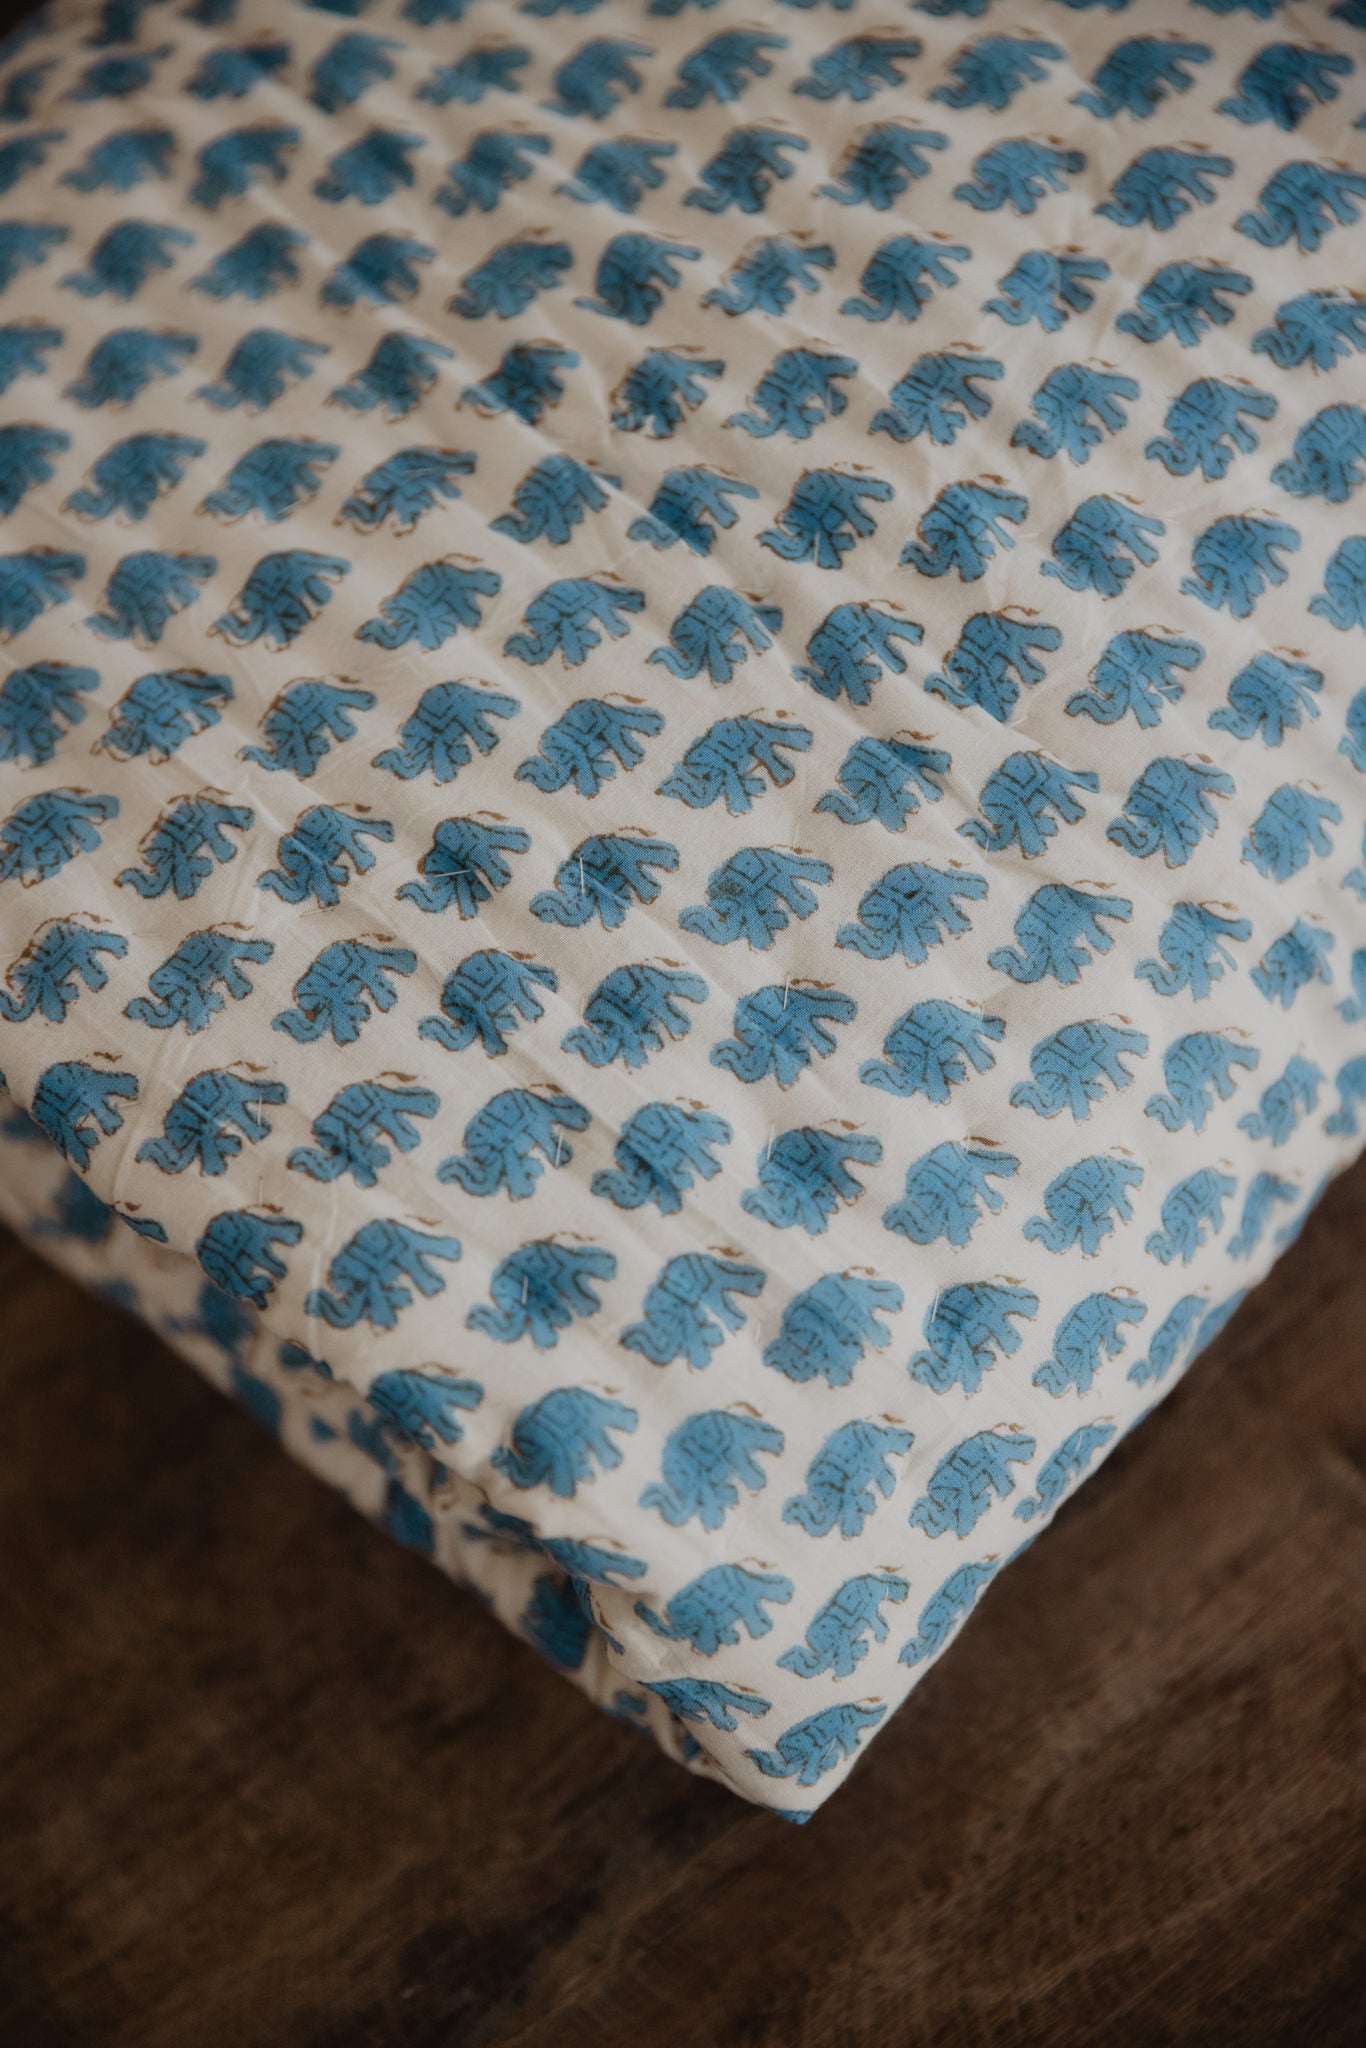 Blue Elephant Baby Quilt